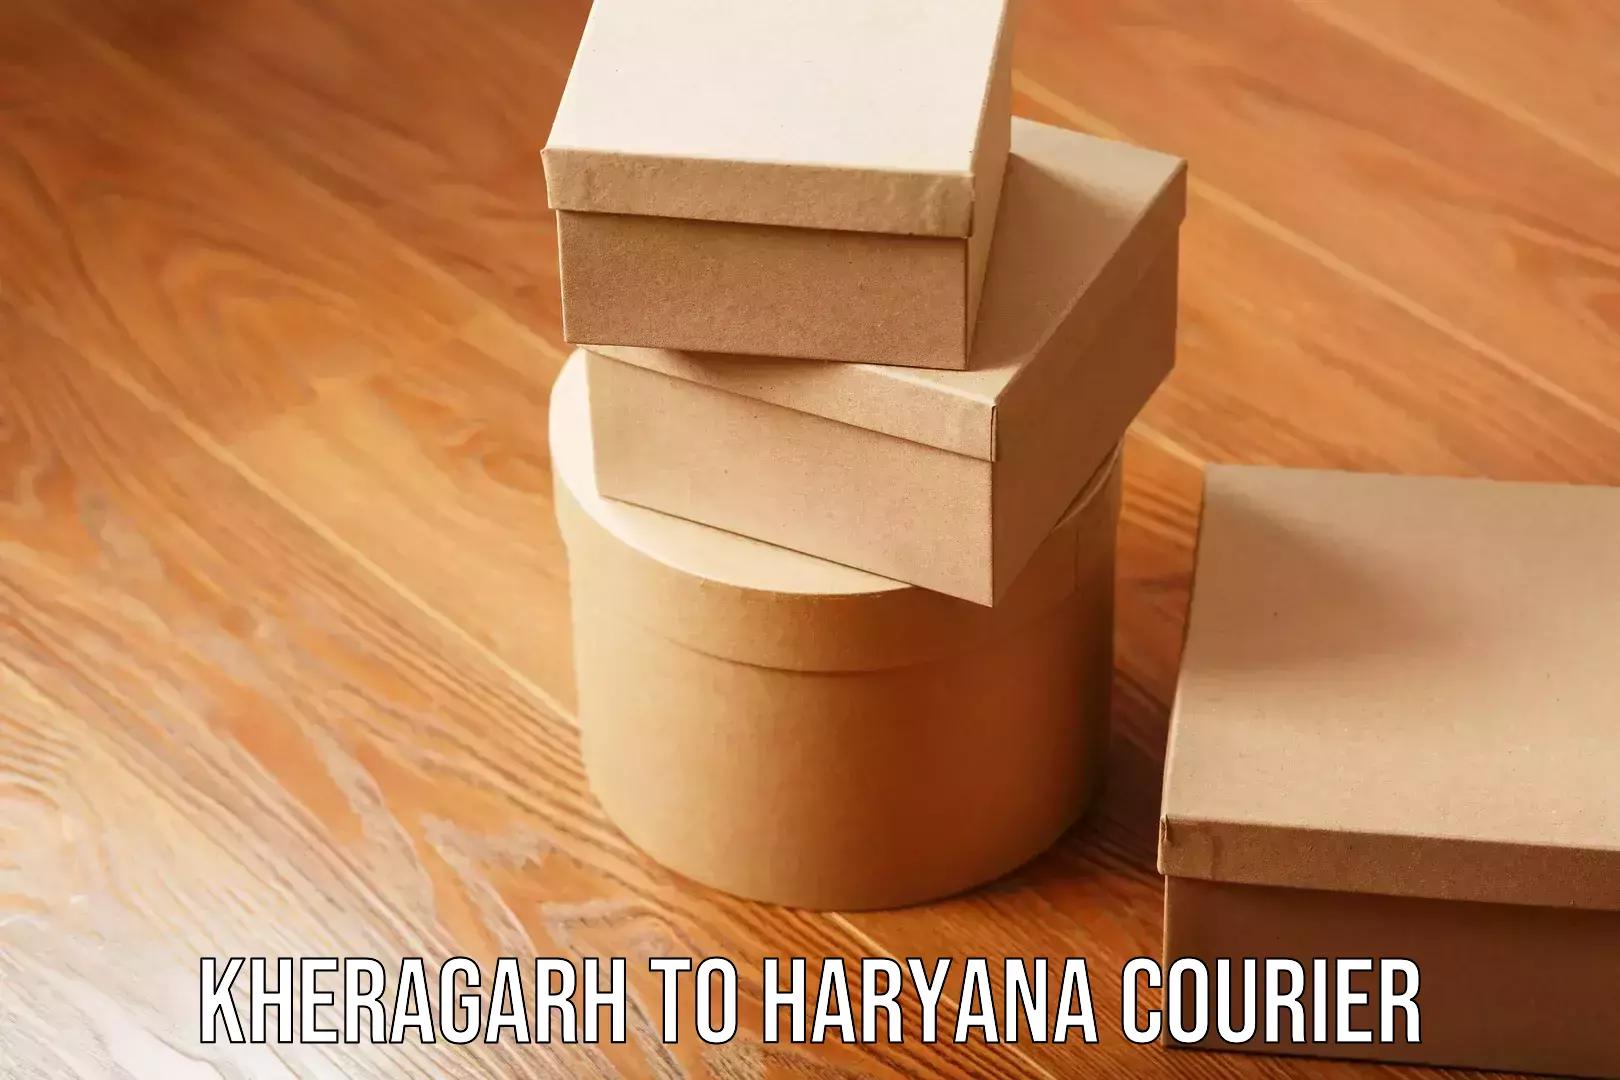 Furniture delivery service in Kheragarh to Haryana